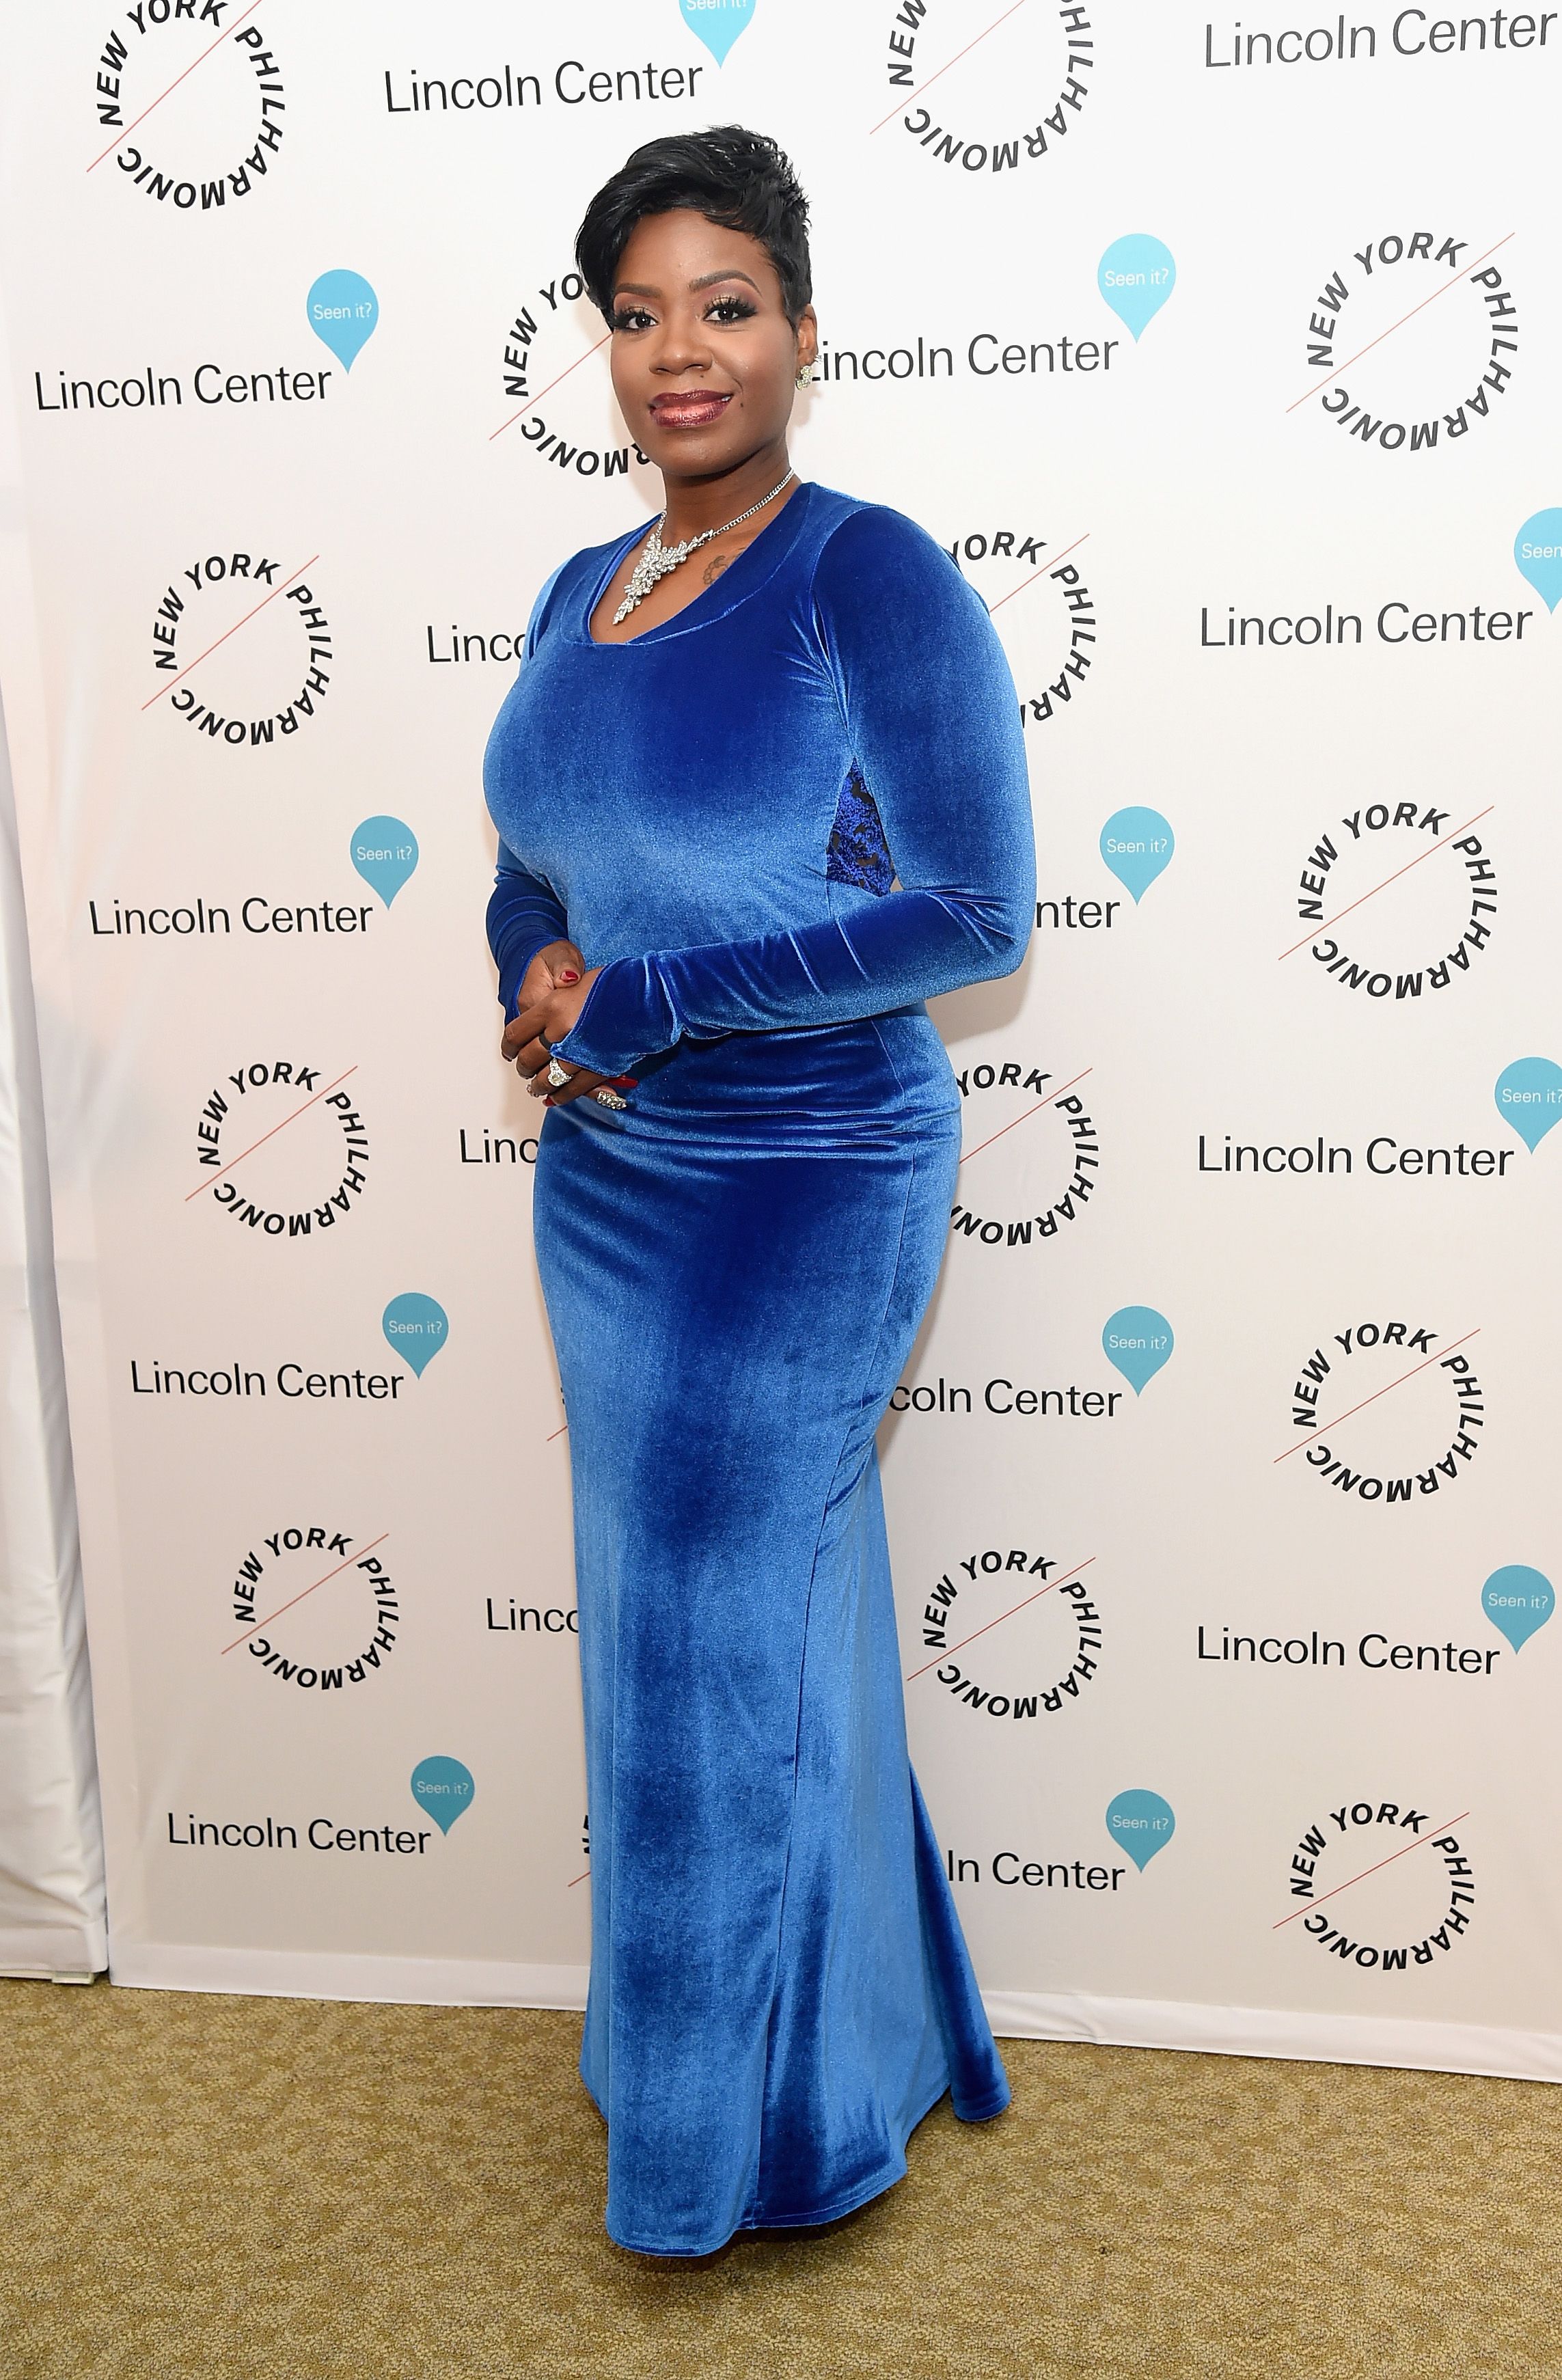 Fantasia Barrino during the "Sinatra Voice for a Century" event at David Geffen Hall on December 3, 2015 in New York City. | Source: Getty Images